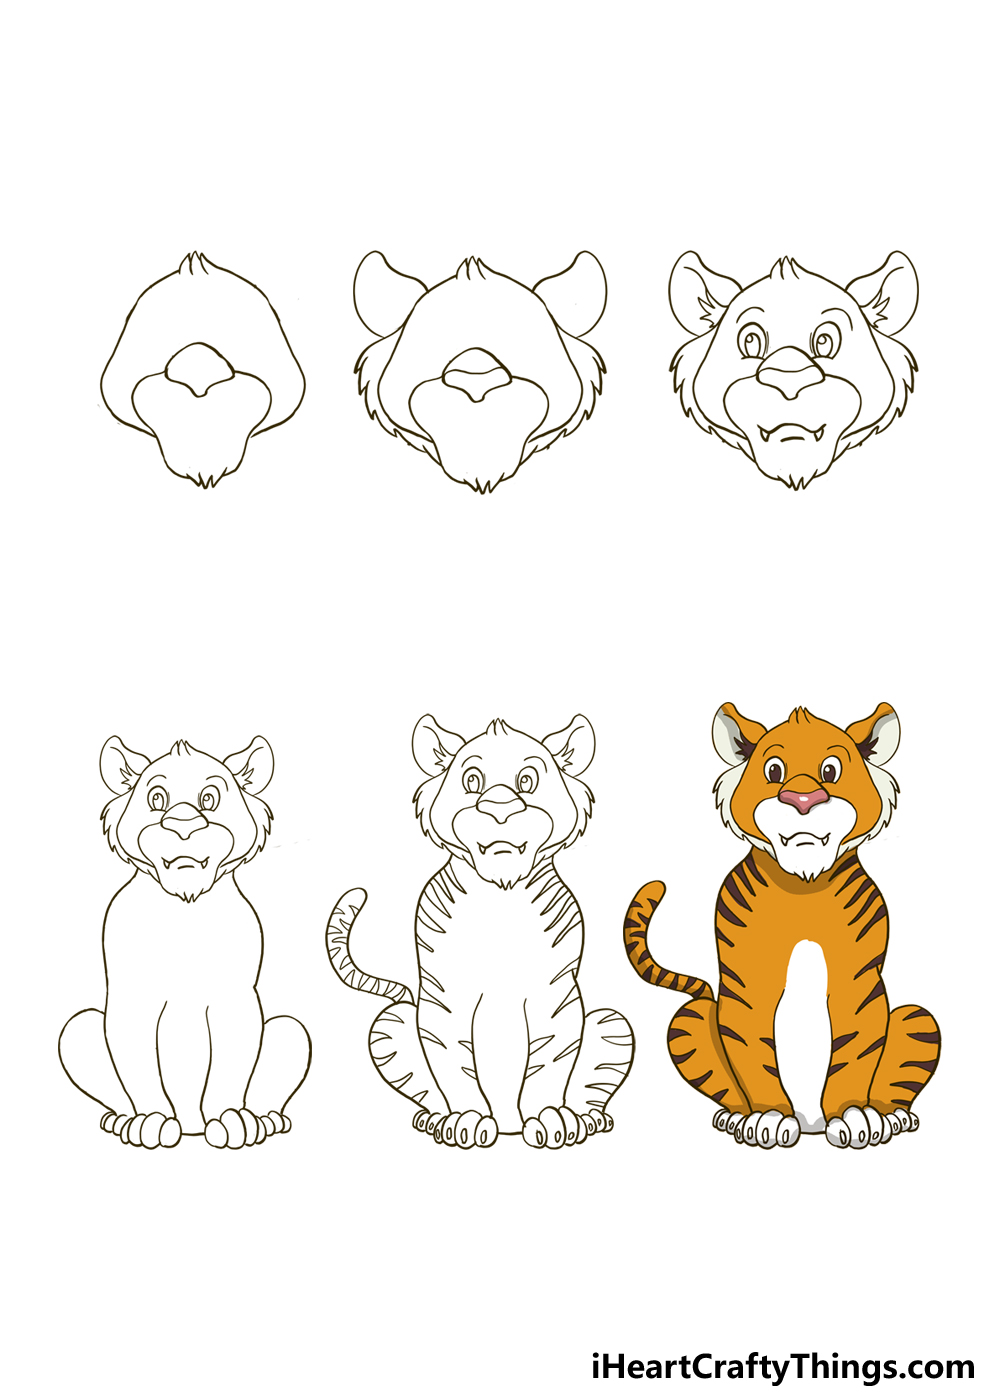 How to Draw A Cartoon Tiger